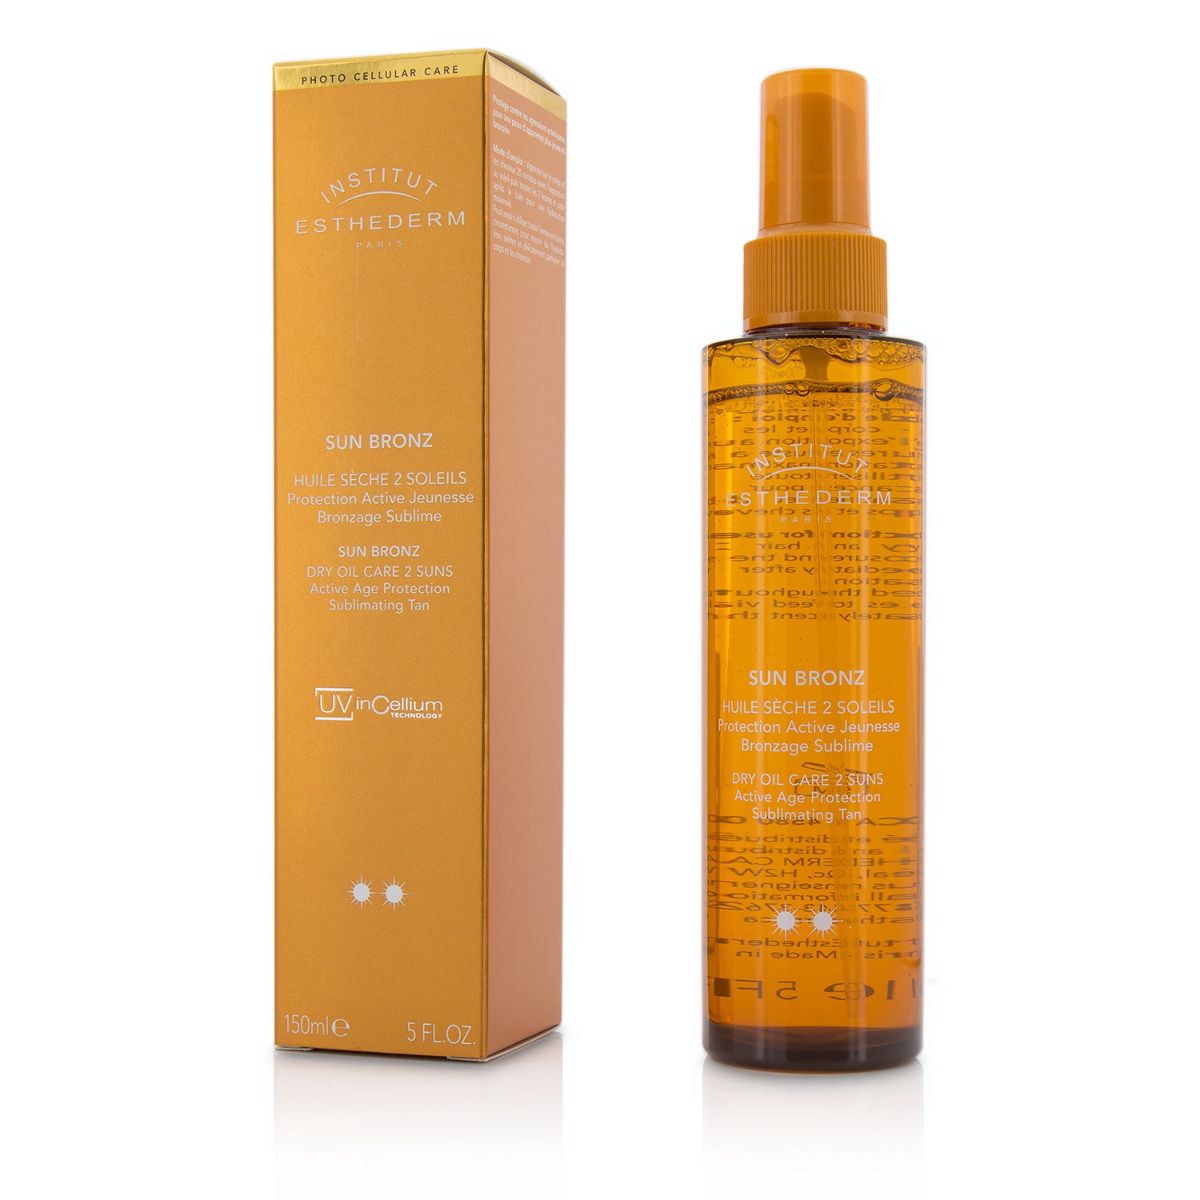 Sun Bronz Dry Oil Care 2 Suns Active Age Protection Sublimating Tan - Moderate Sun - For Body  Hair Esthederm Image